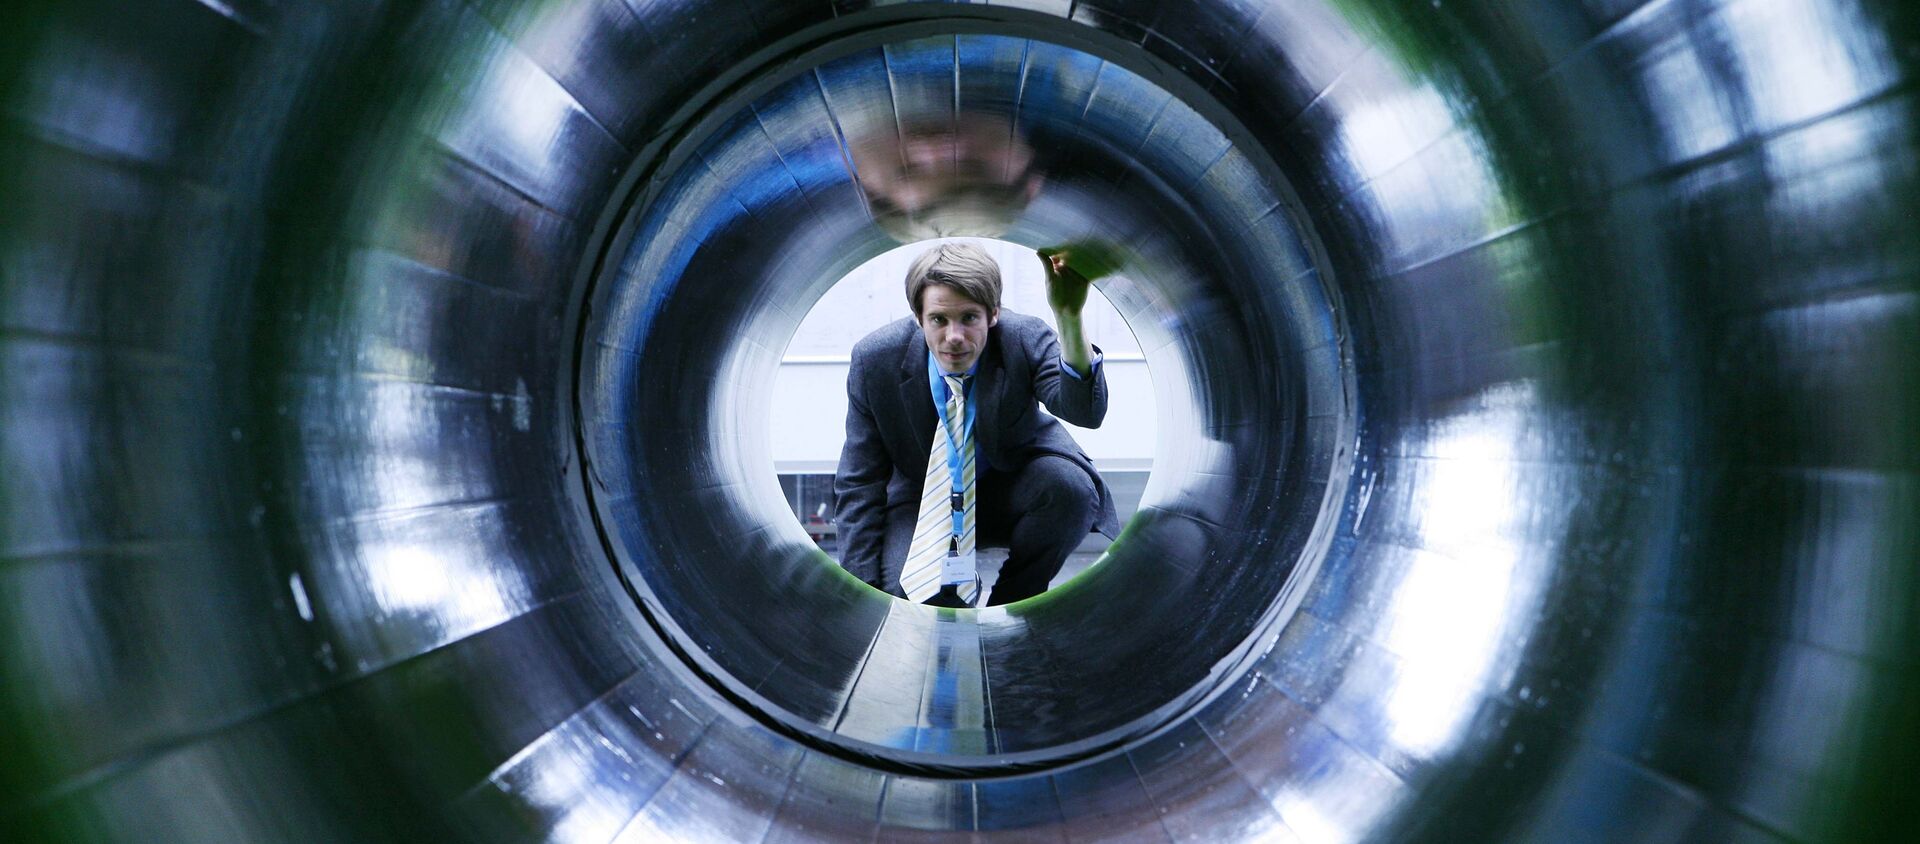 A man looks into a tube representing a natural gas pipeline at the booth of Nord Stream at the Hanover industrial fair in Hanover, Germany (File) - Sputnik International, 1920, 09.06.2018